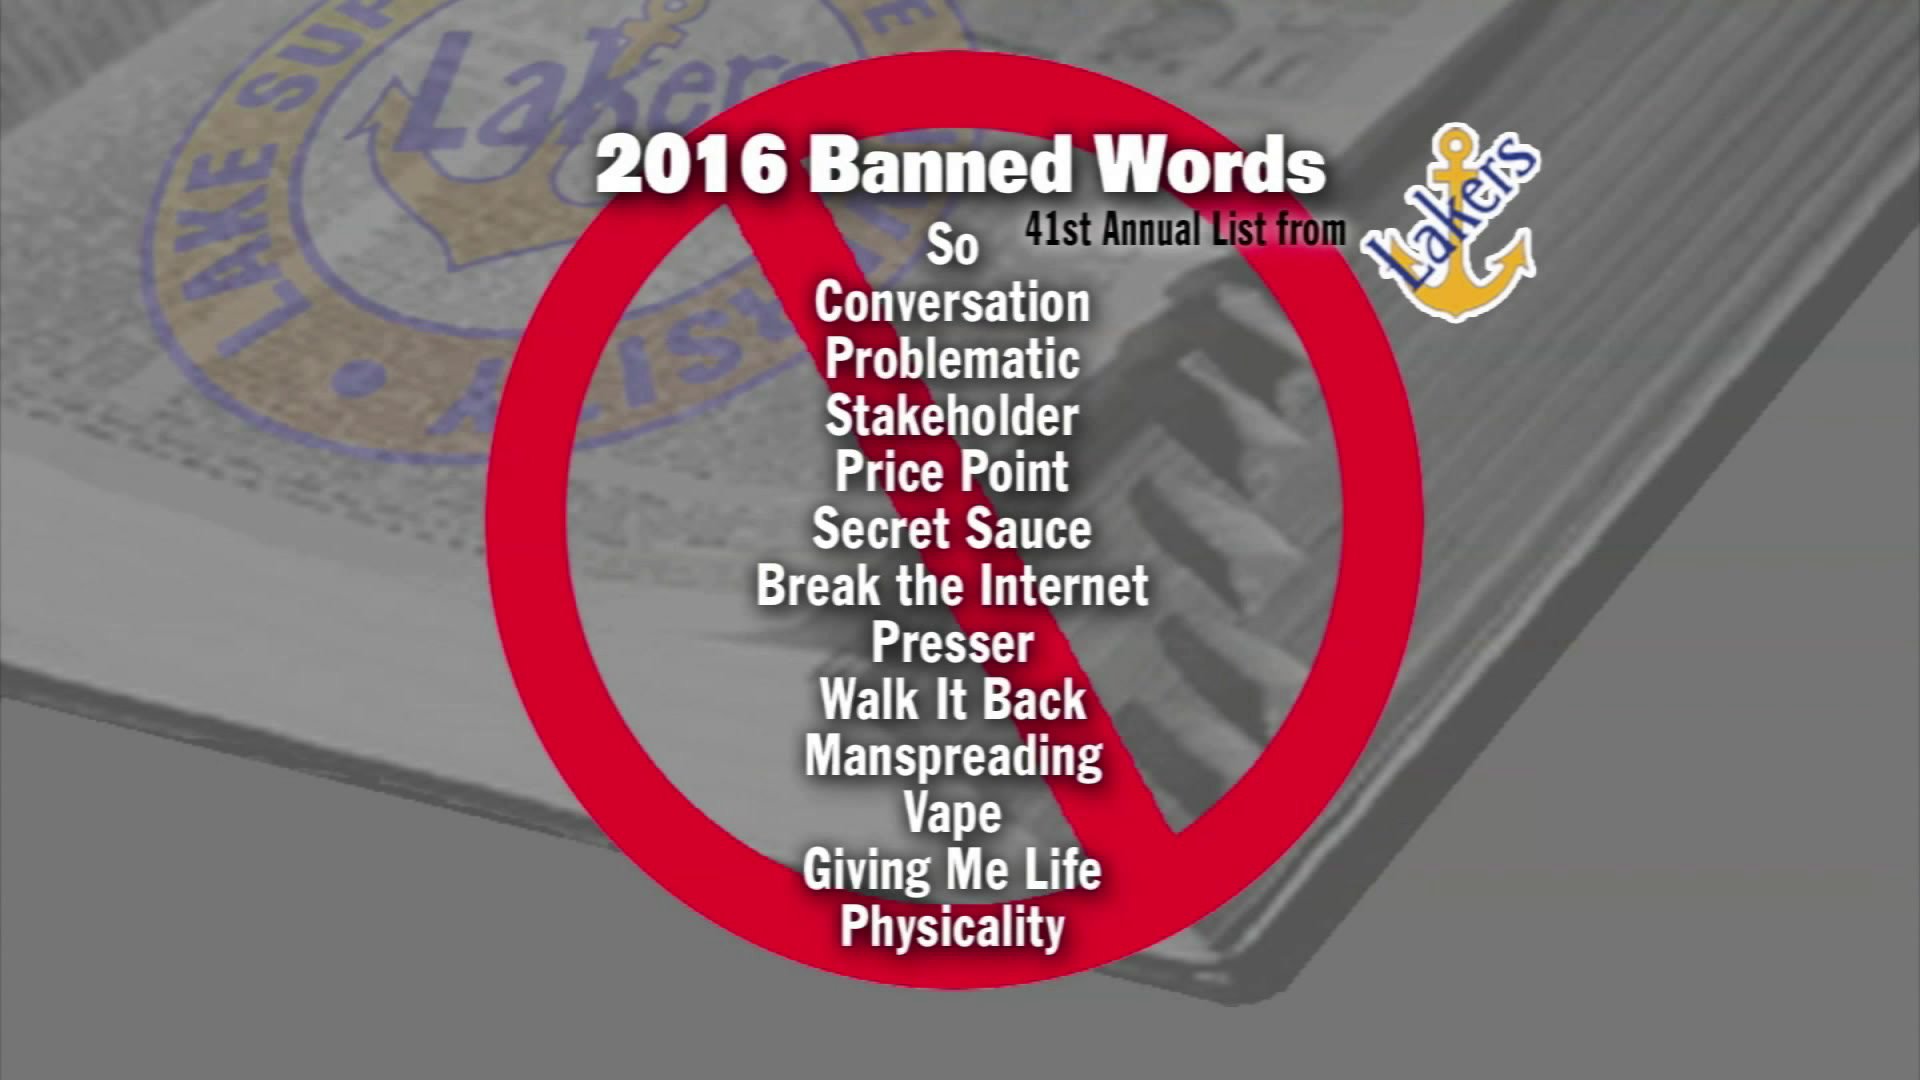 Lake Superior State University has come out with its annual list of banished words.